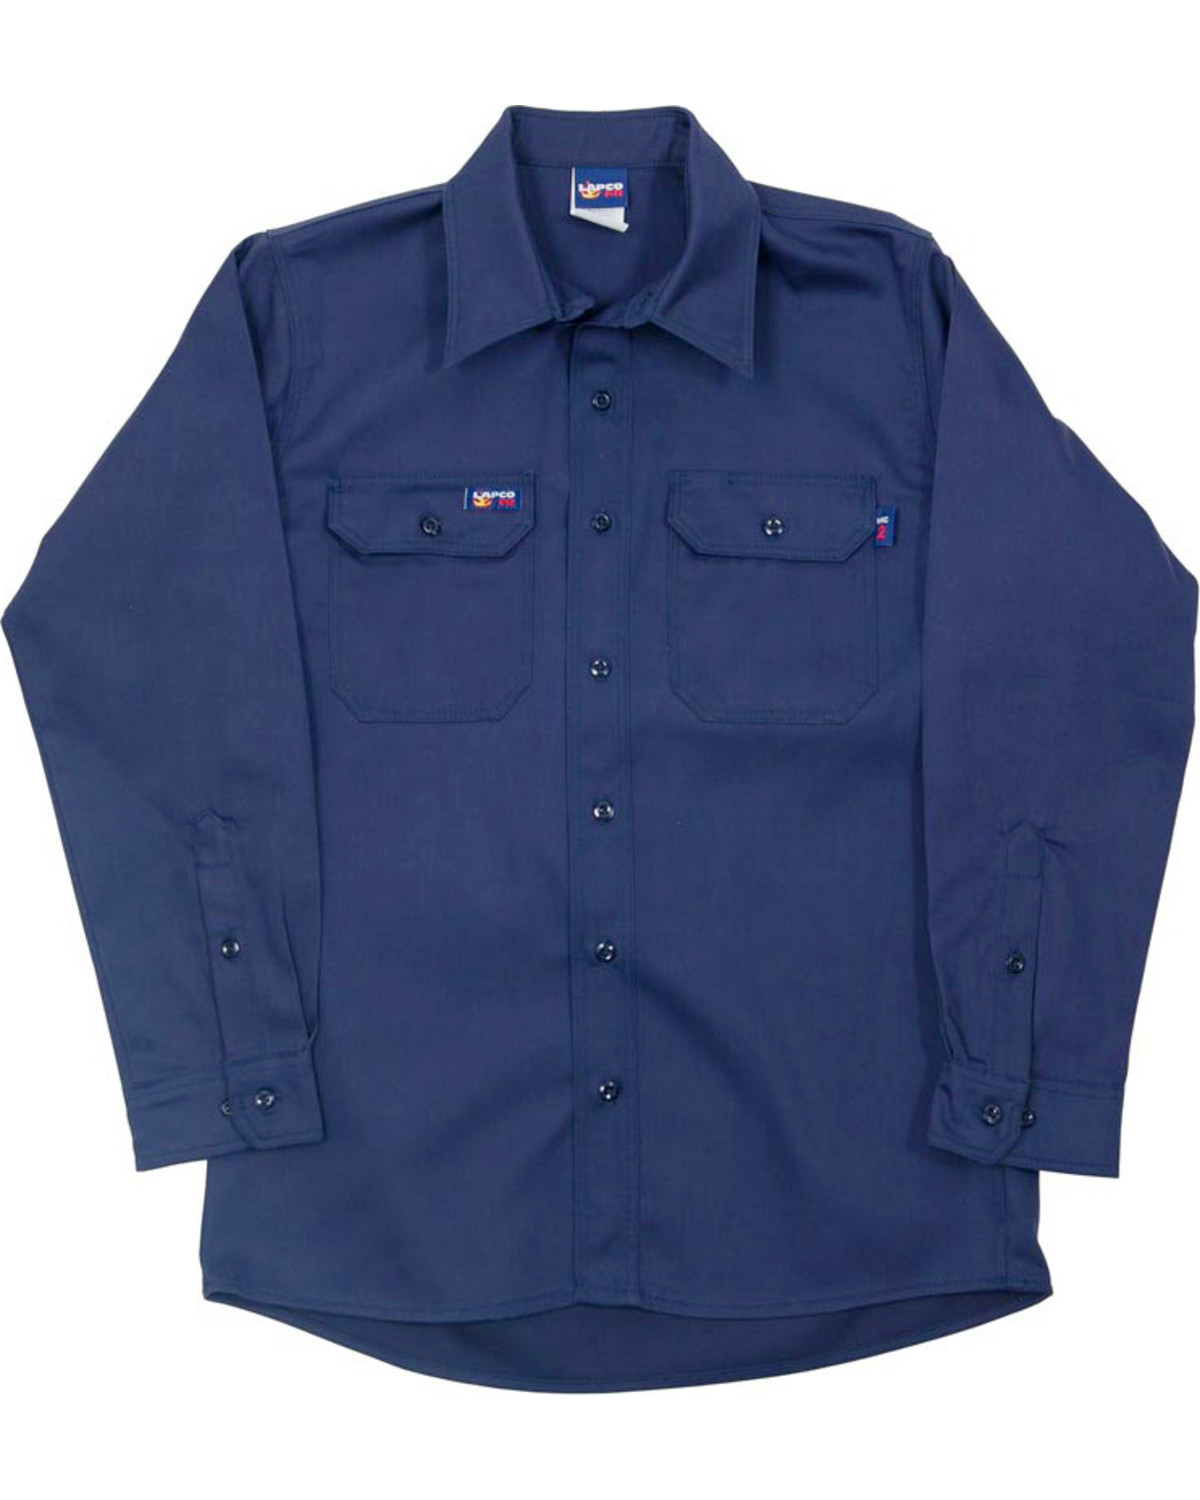 Lapco Men's FR Solid Long Sleeve Button Down Work Shirt